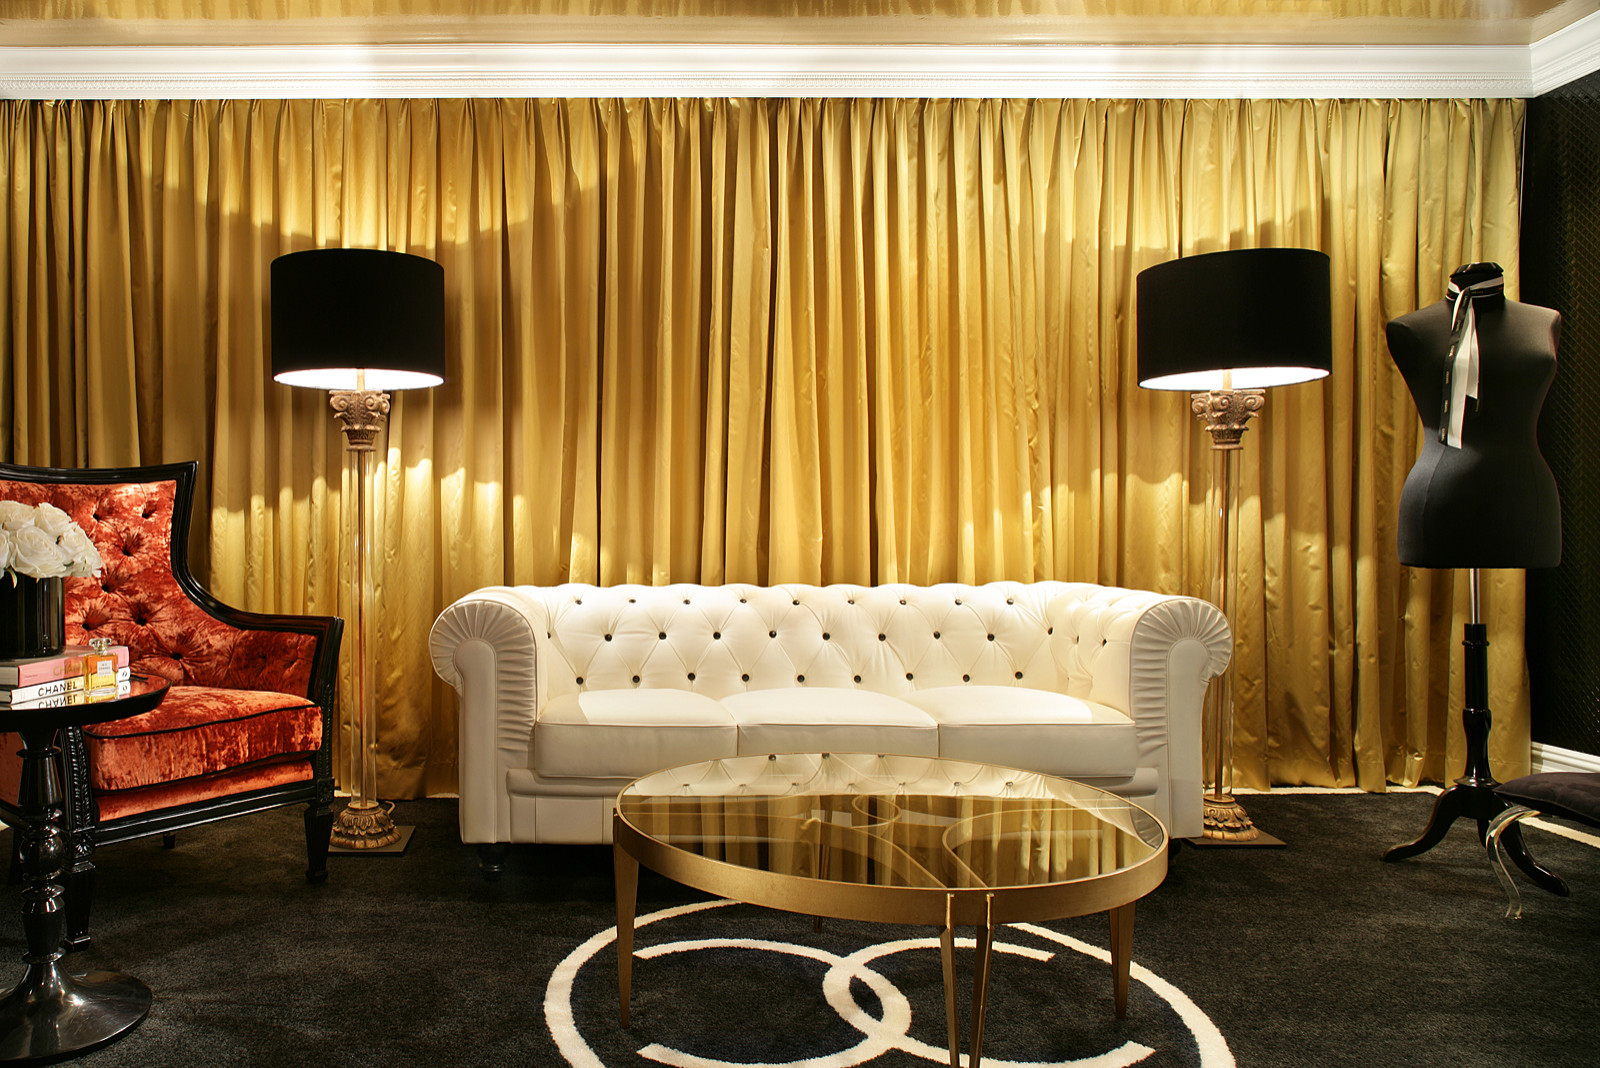 Rooms Inspired by Coco Chanel – MarvinGardensUSA